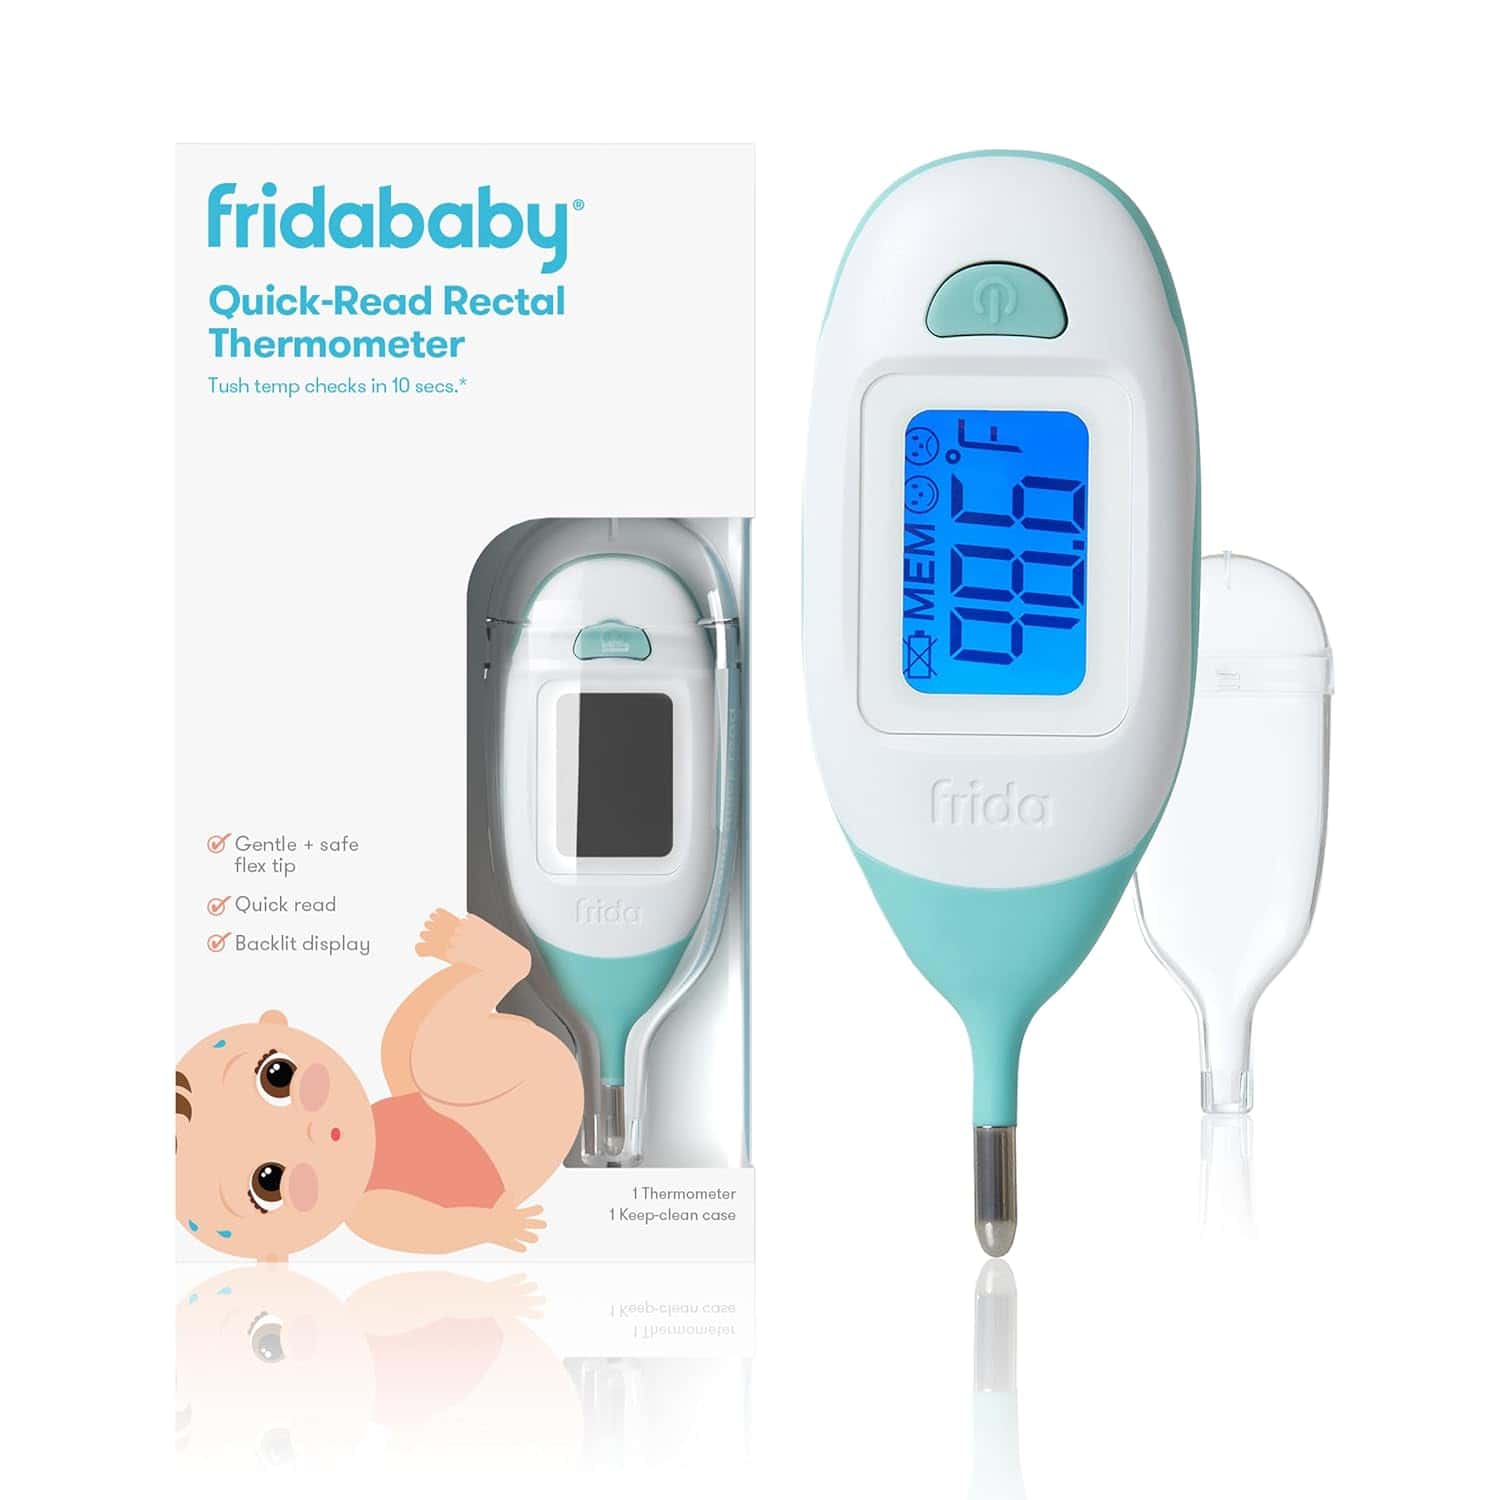 Fridababy Rectal Thermometer